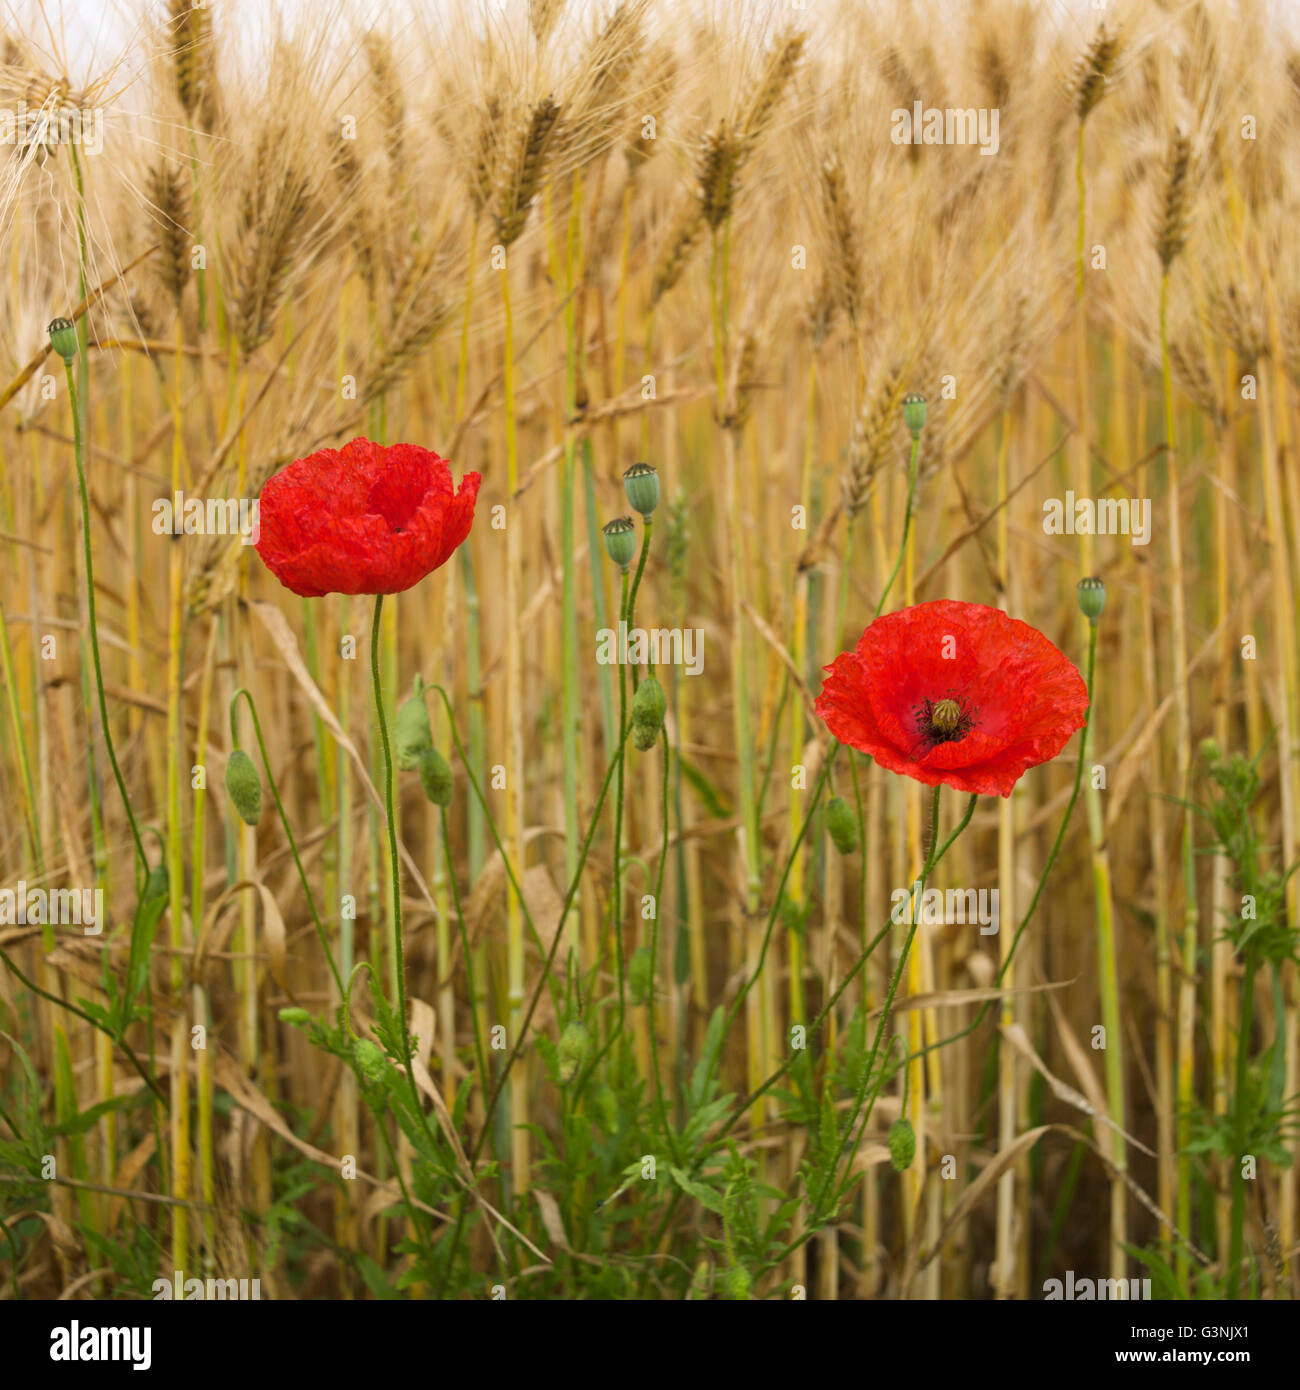 Poppies (Papaver sp.) in a field of Barley (Hordeum vulgare), Limagne, Auvergne, France, Europe Stock Photo